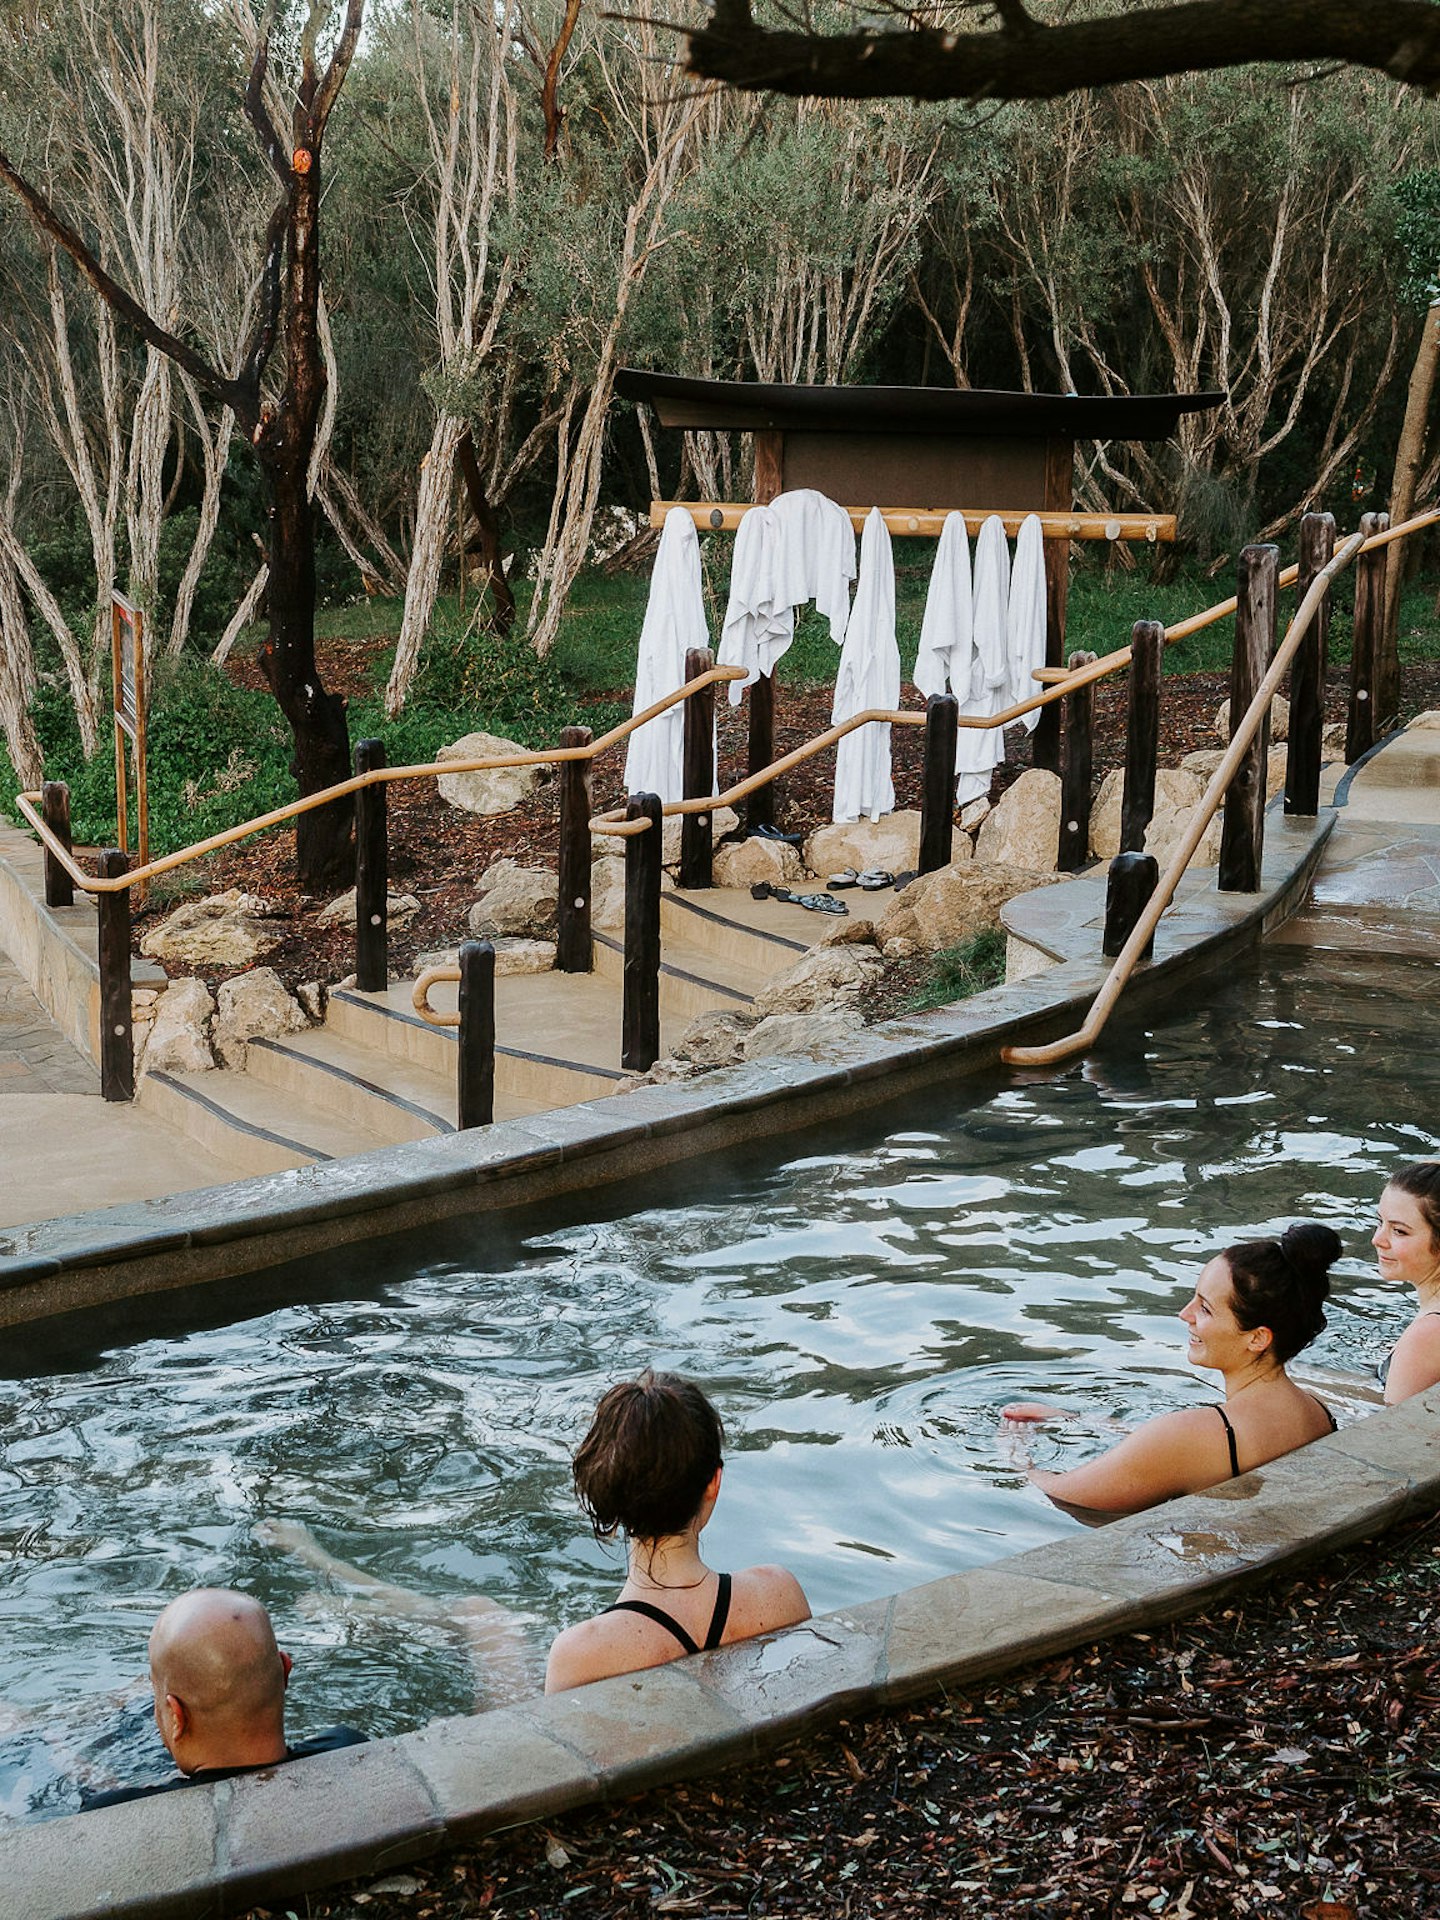 group of friends sitting in amphitheatre pool with trees and hanging bath robes in background